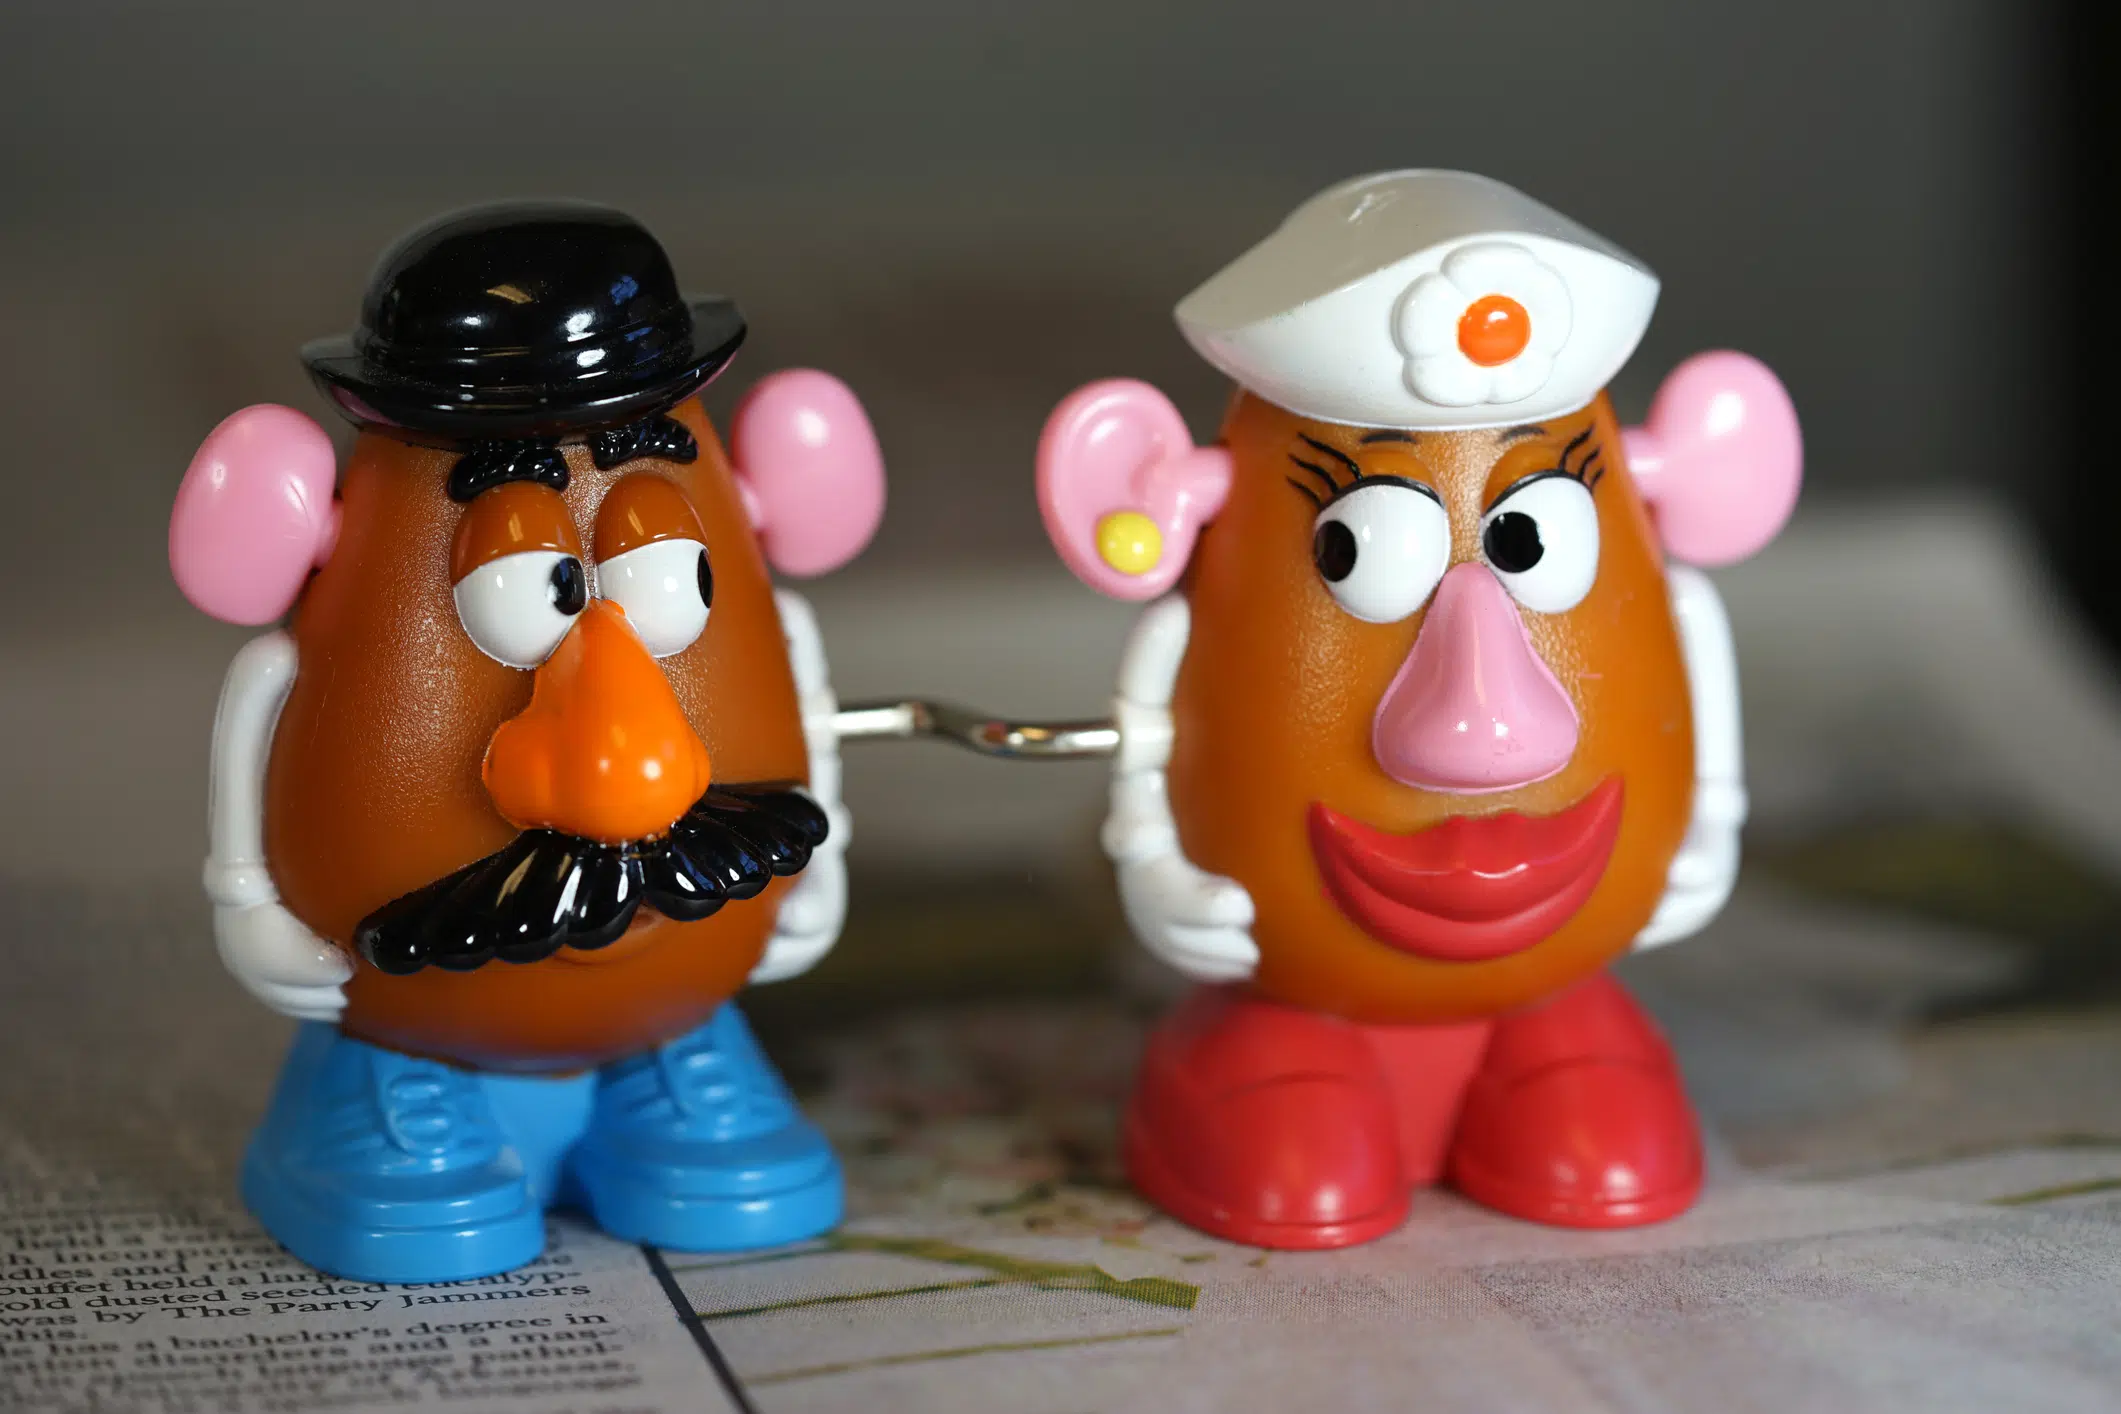 The Potato Heads are going gender neutral